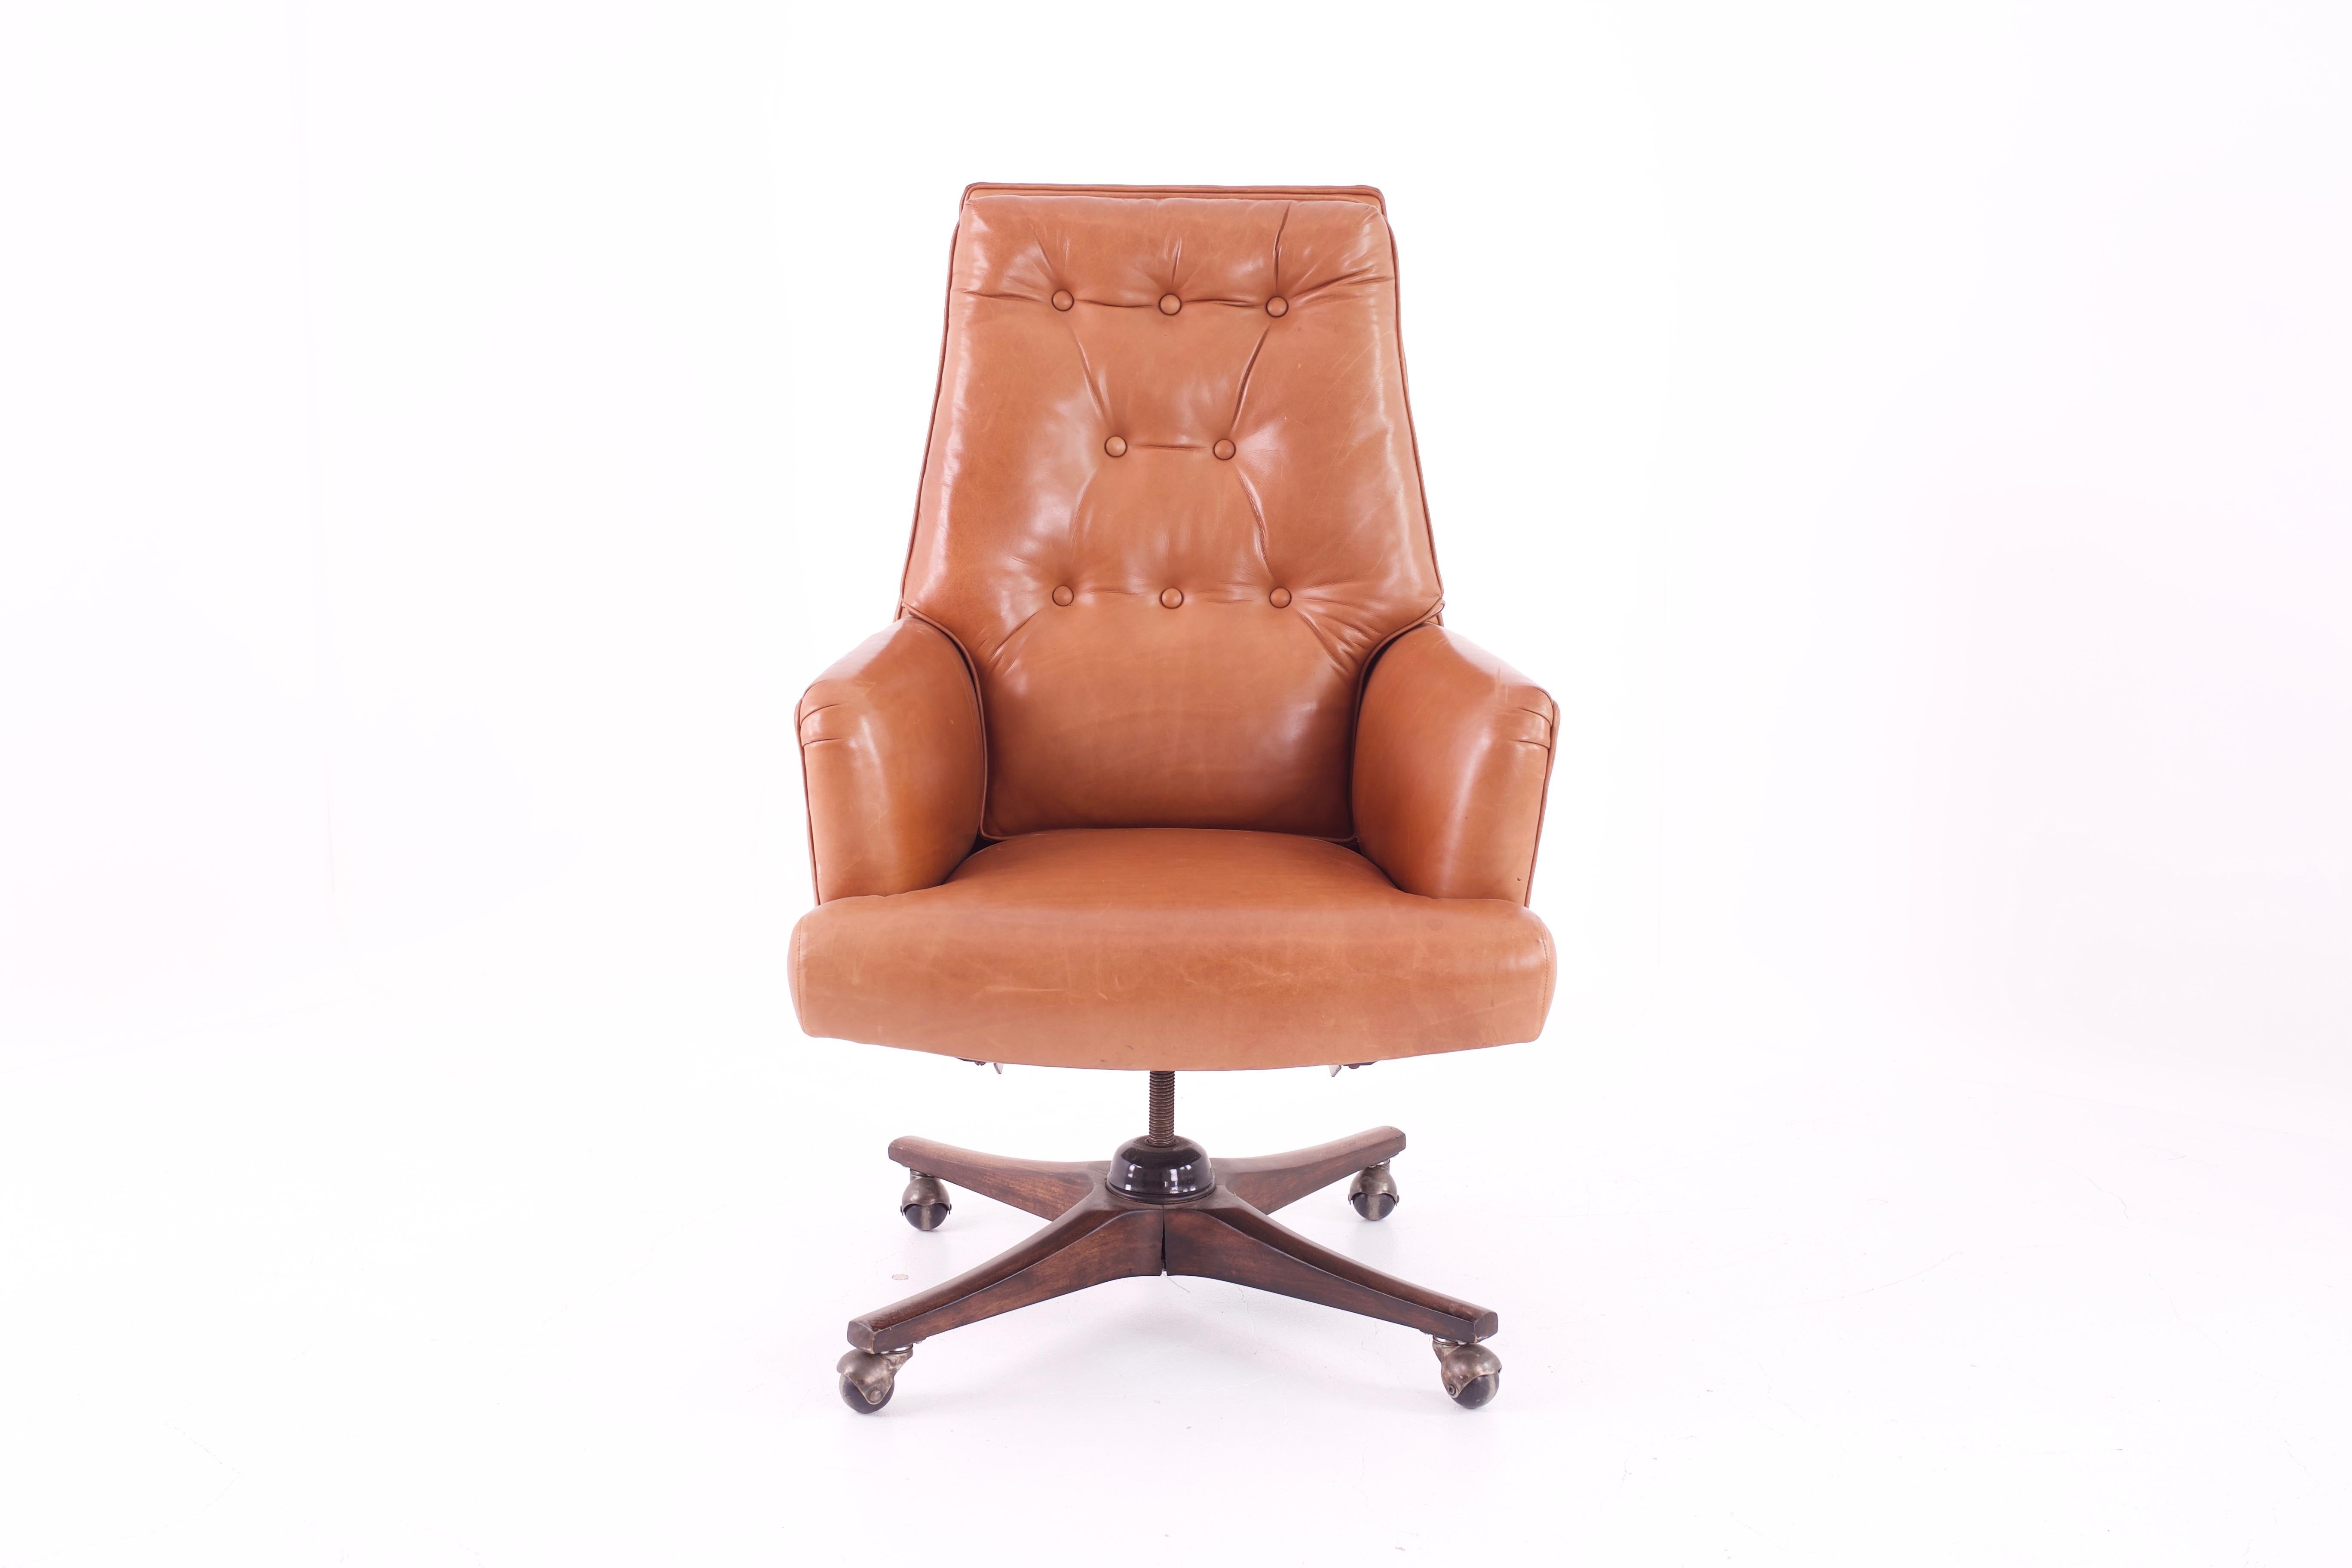 Edward Wormley for Dunbar style Mid Century leather orange desk chair
Chair measures: 27 wide x 25 deep x 44 high with a seat height of 19 inches
This price includes getting this piece in what we call restored vintage condition. Upon purchase it is